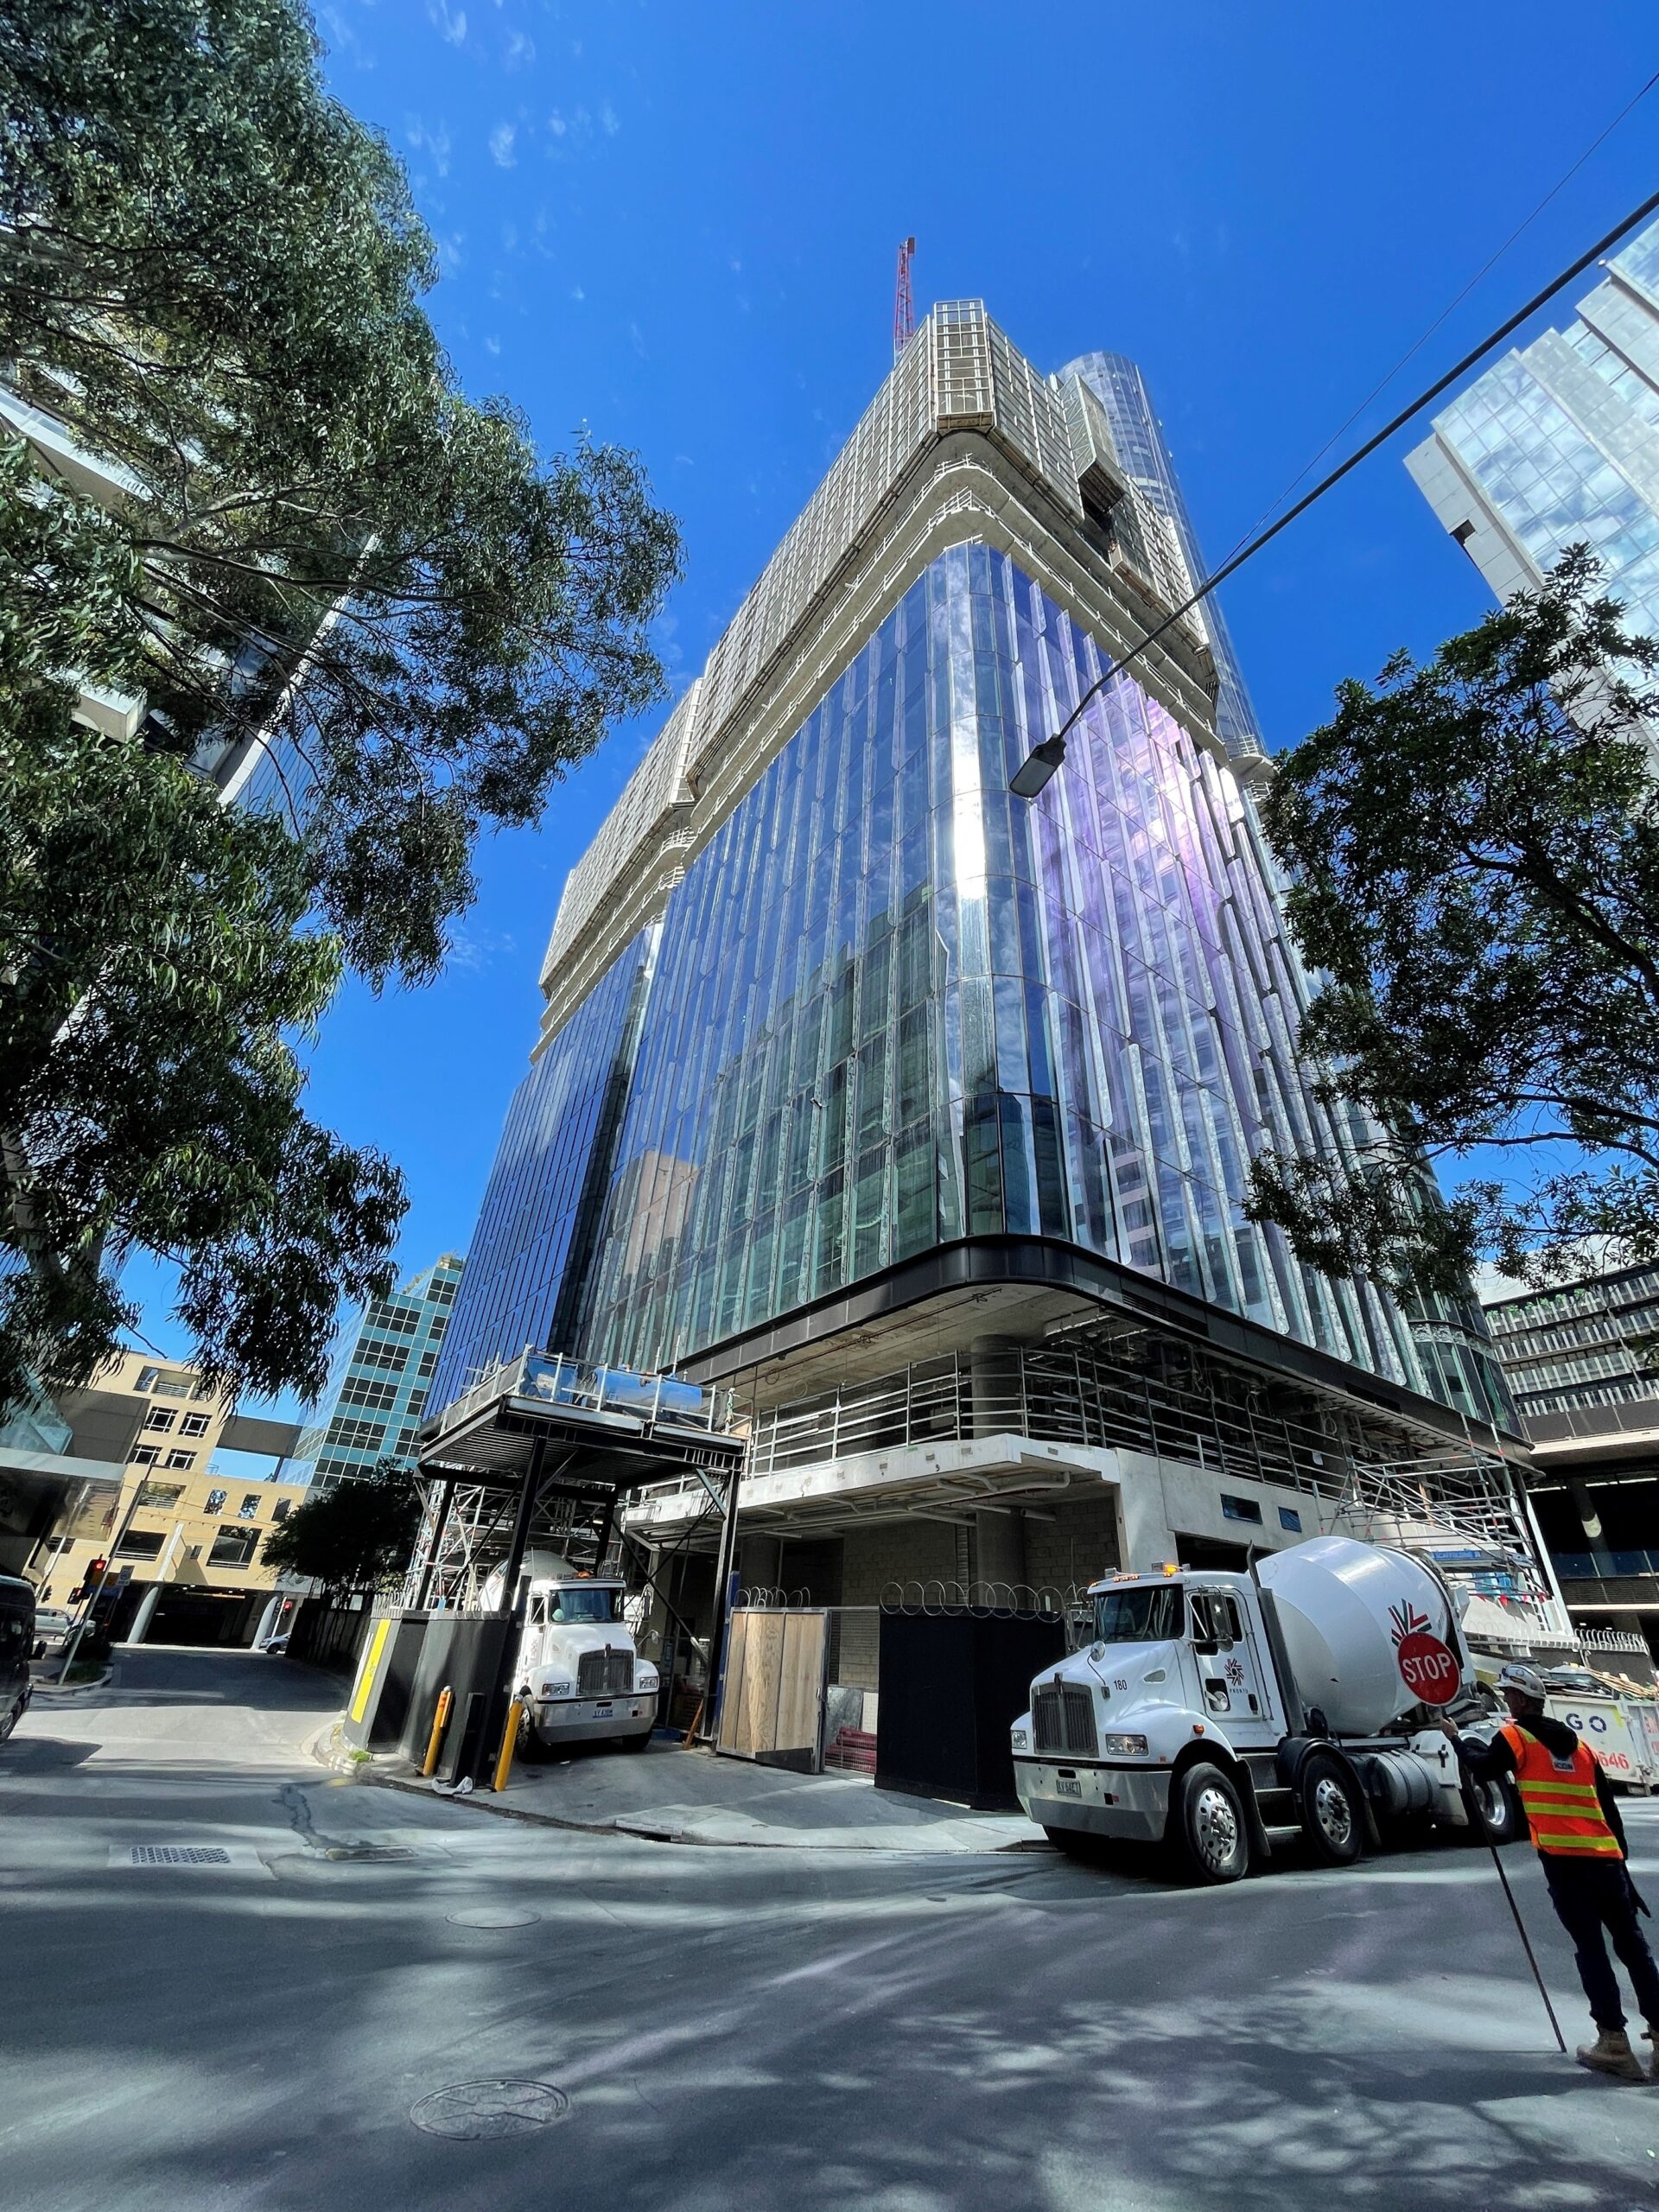 627 CHAPEL ST HAS REACHED MID-POINT IN THE CONSTRUCTION PROGRAMME